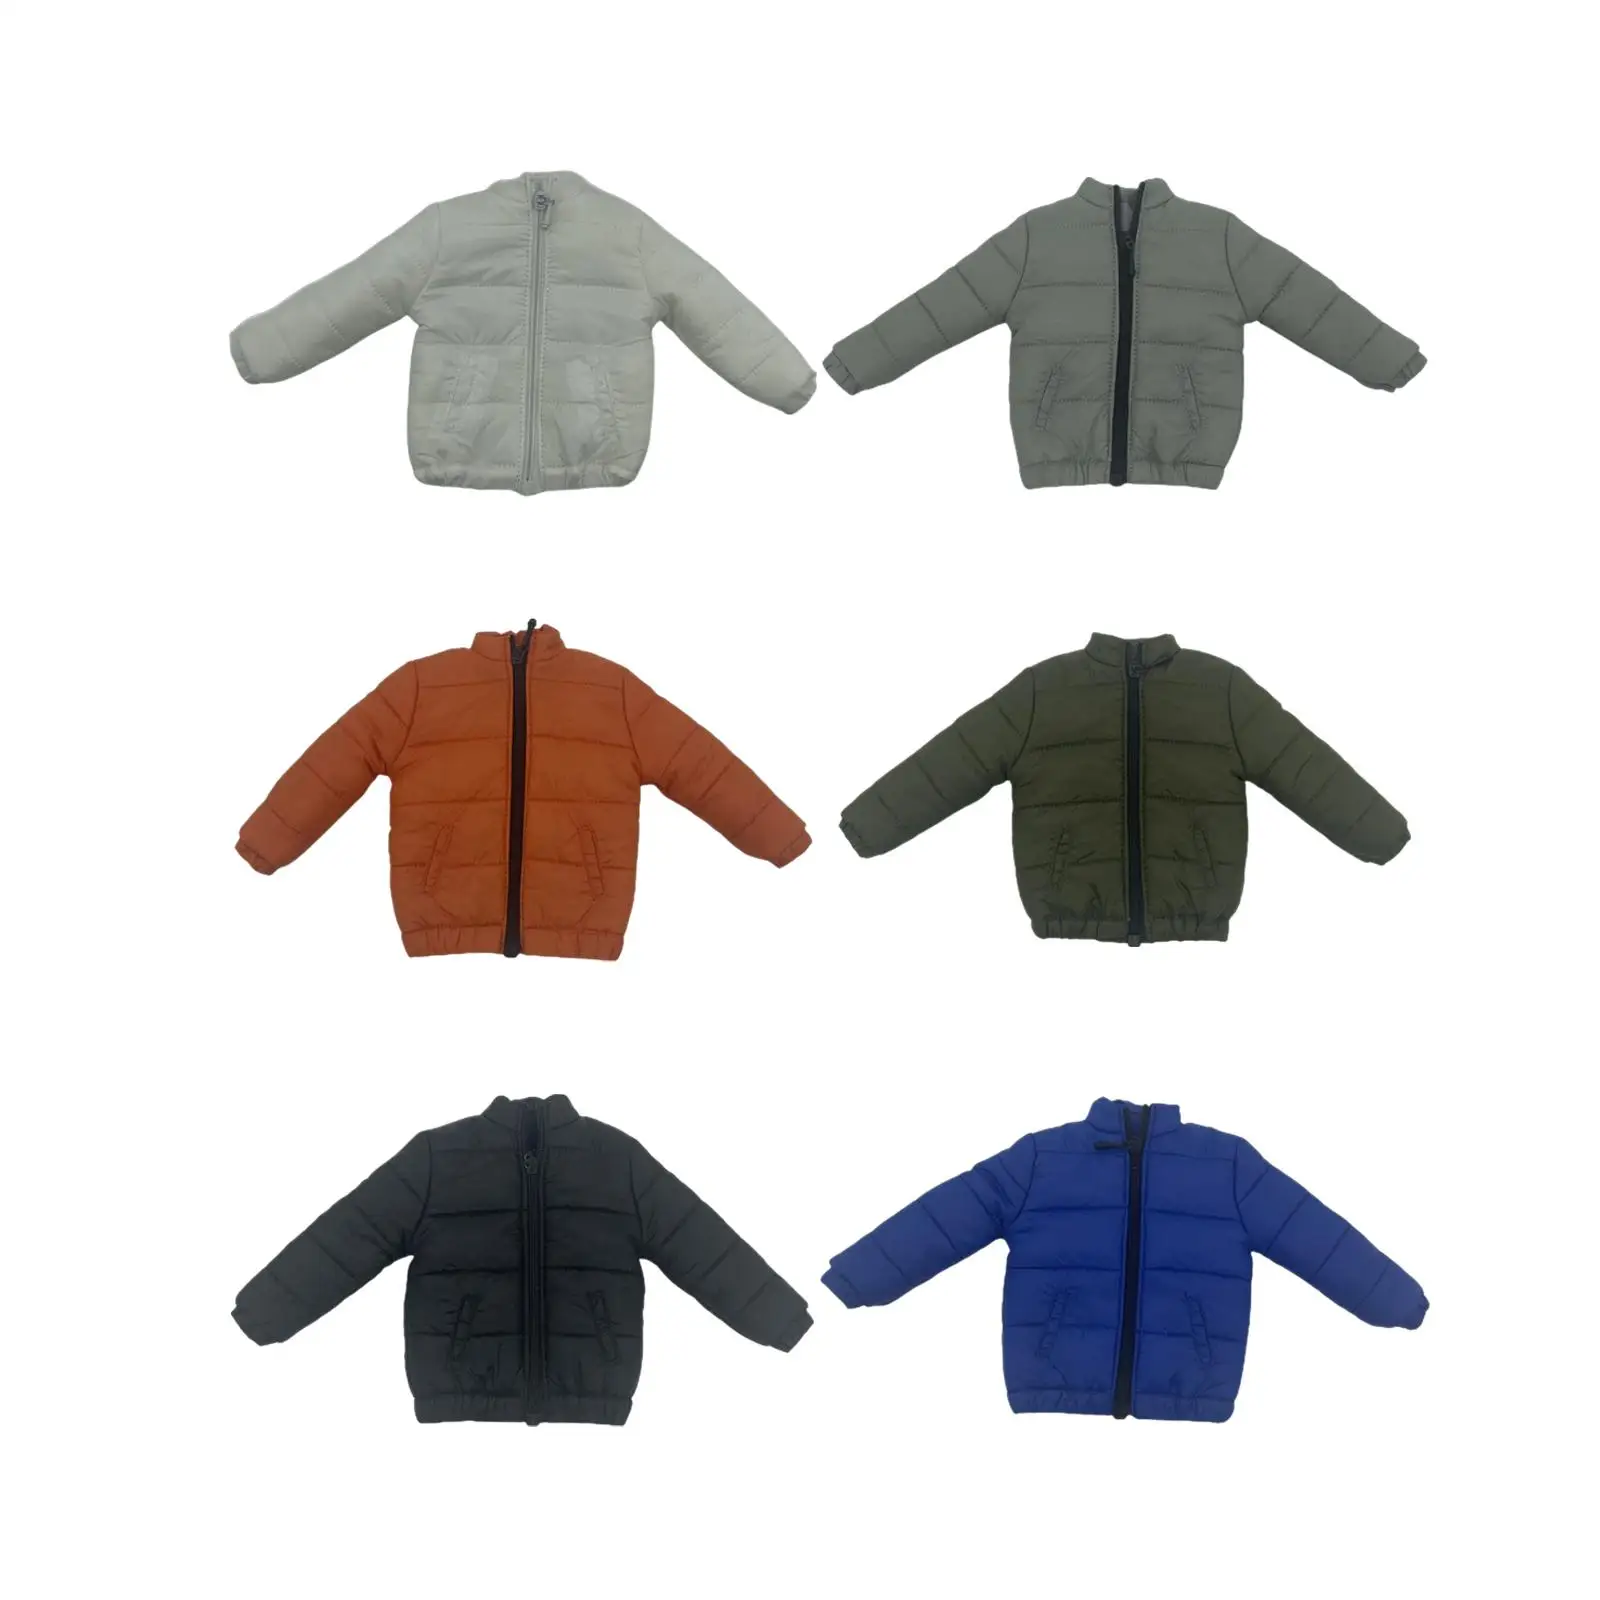 Fashion 1/6 Scale Doll Down Jacket Daily Wear Clothing Outfit Dress Up Clothing for 12 in Male Action Figures